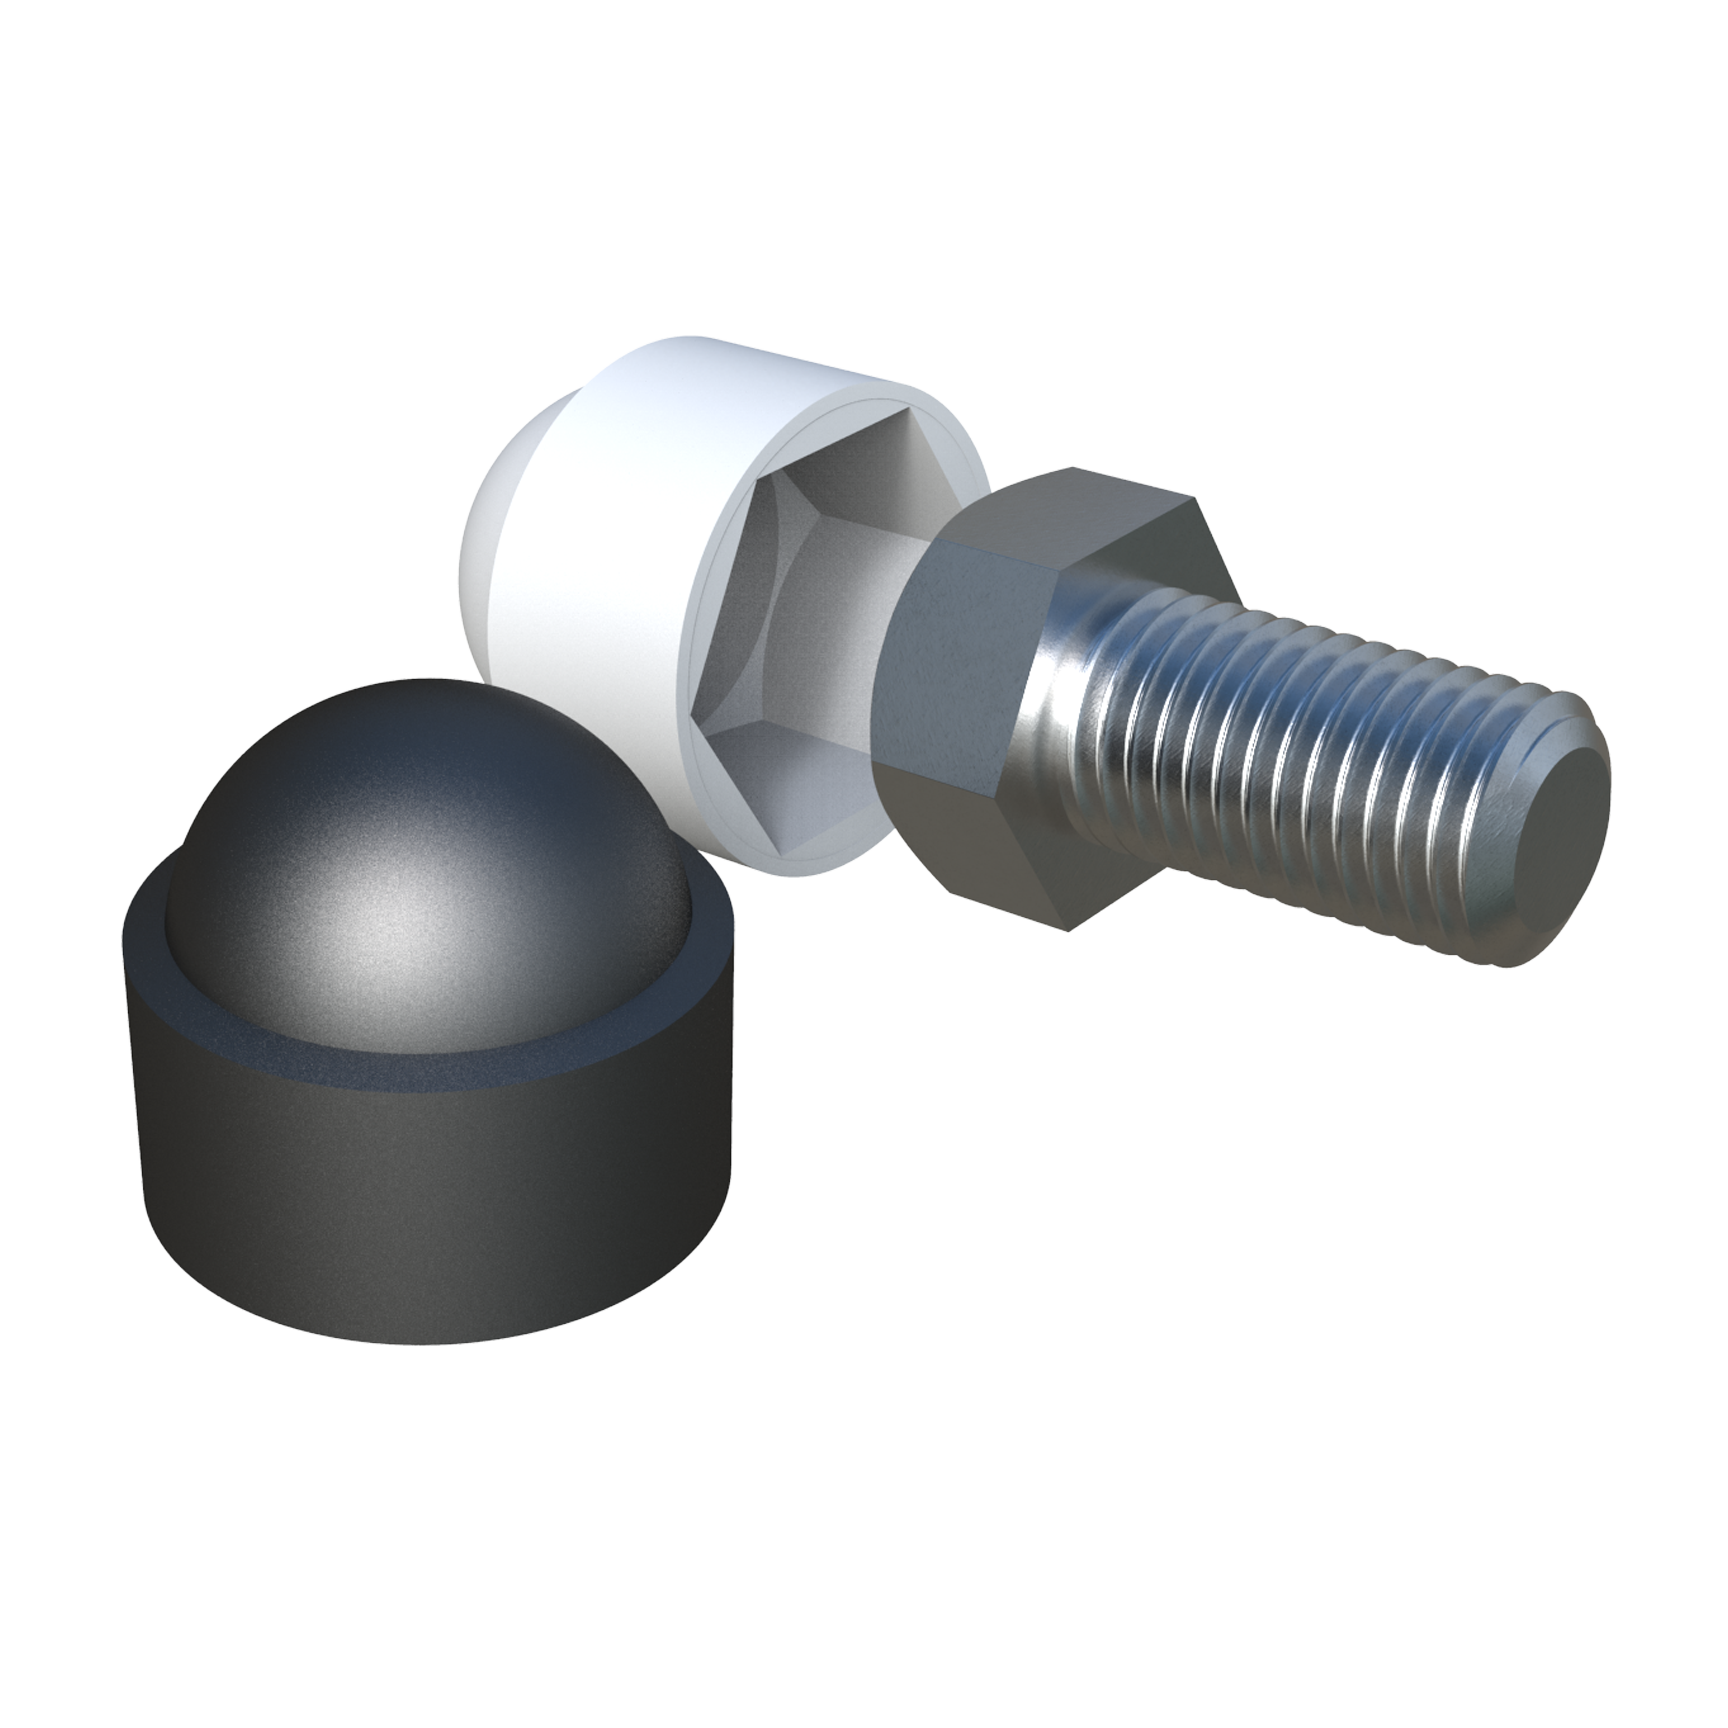 Our protection cap is suitable for DIN, ISO and ANSI screws and hex nuts. It serves as protection against impact and dirt and at the same time as an embellisher for DIN / ISO screws from M4 to M48 (suitable for DIN screws 933, 931, 961 and 960 and ISO 4017 and 4014). <br>The complete LBK range is offered with the possibility of submitting the pieces to a plastic metallization process that gives them a <b>shiny metallic finish</b>. In the same way, the manufacture in RAL colors can also be requested on demand and minimum order. Consult the conditions to our commercial department.